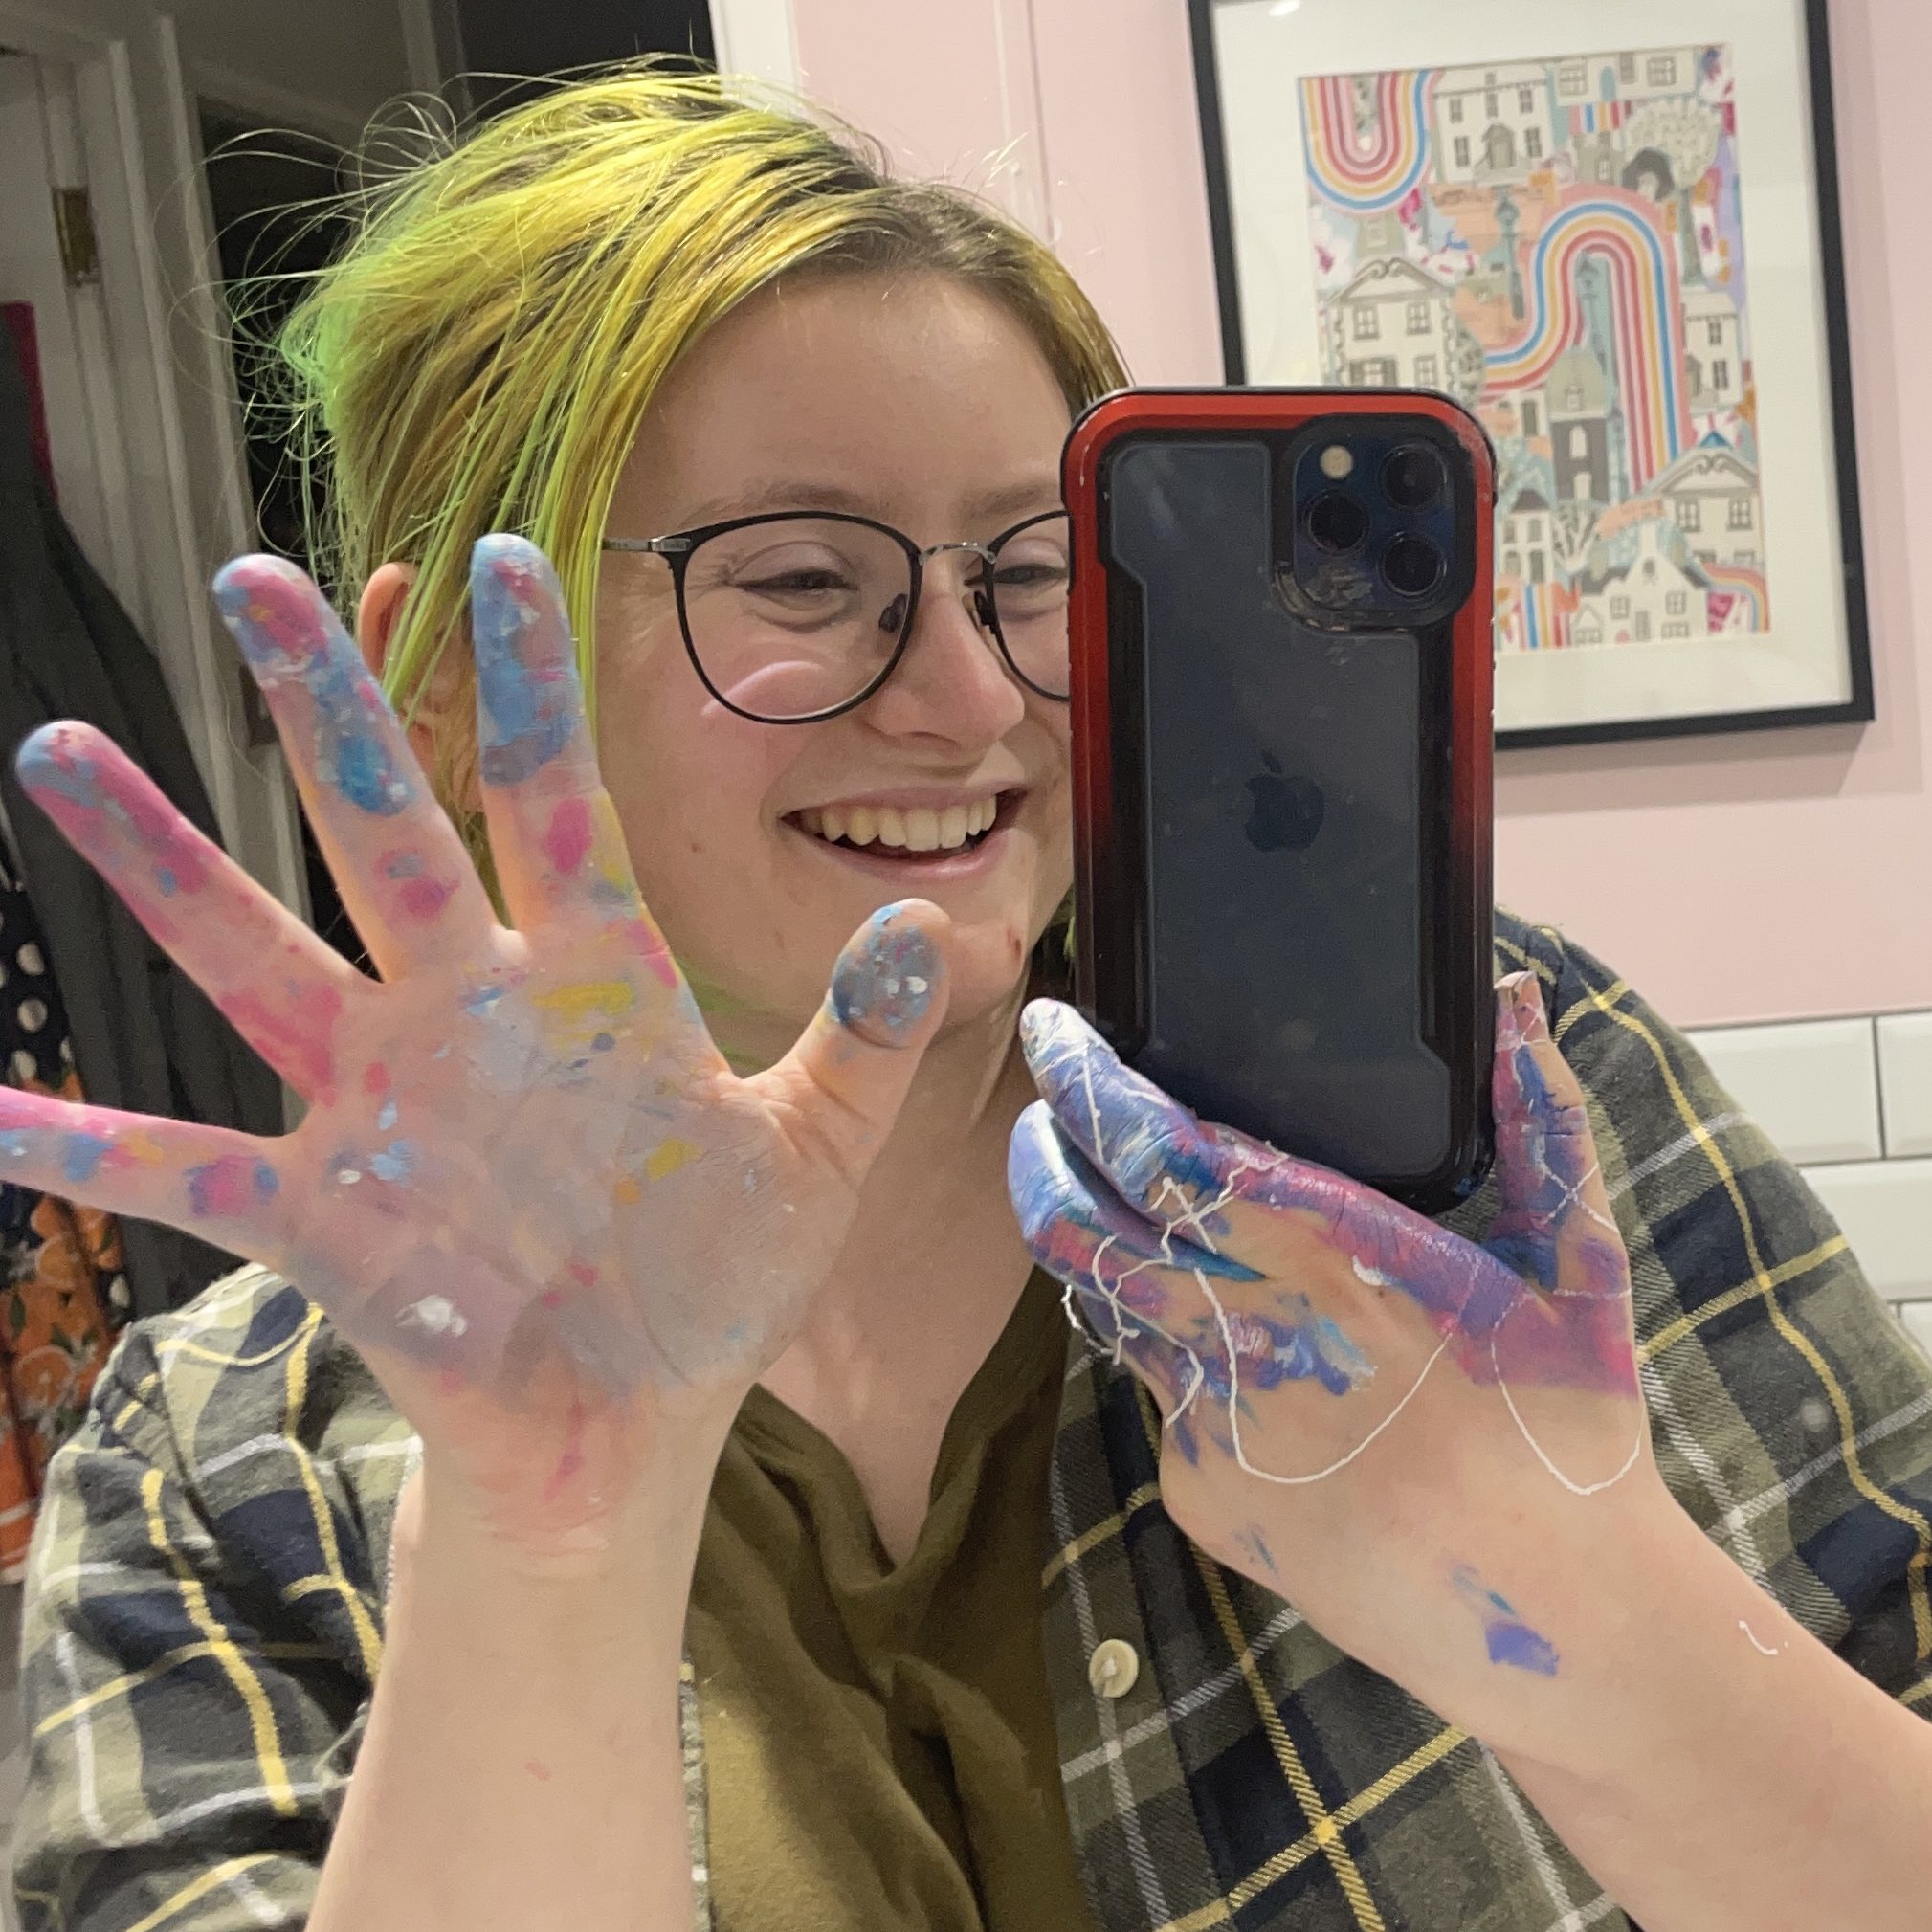 Freddie, a white person with green hair, poses with colorful splatters of paint on his hands.